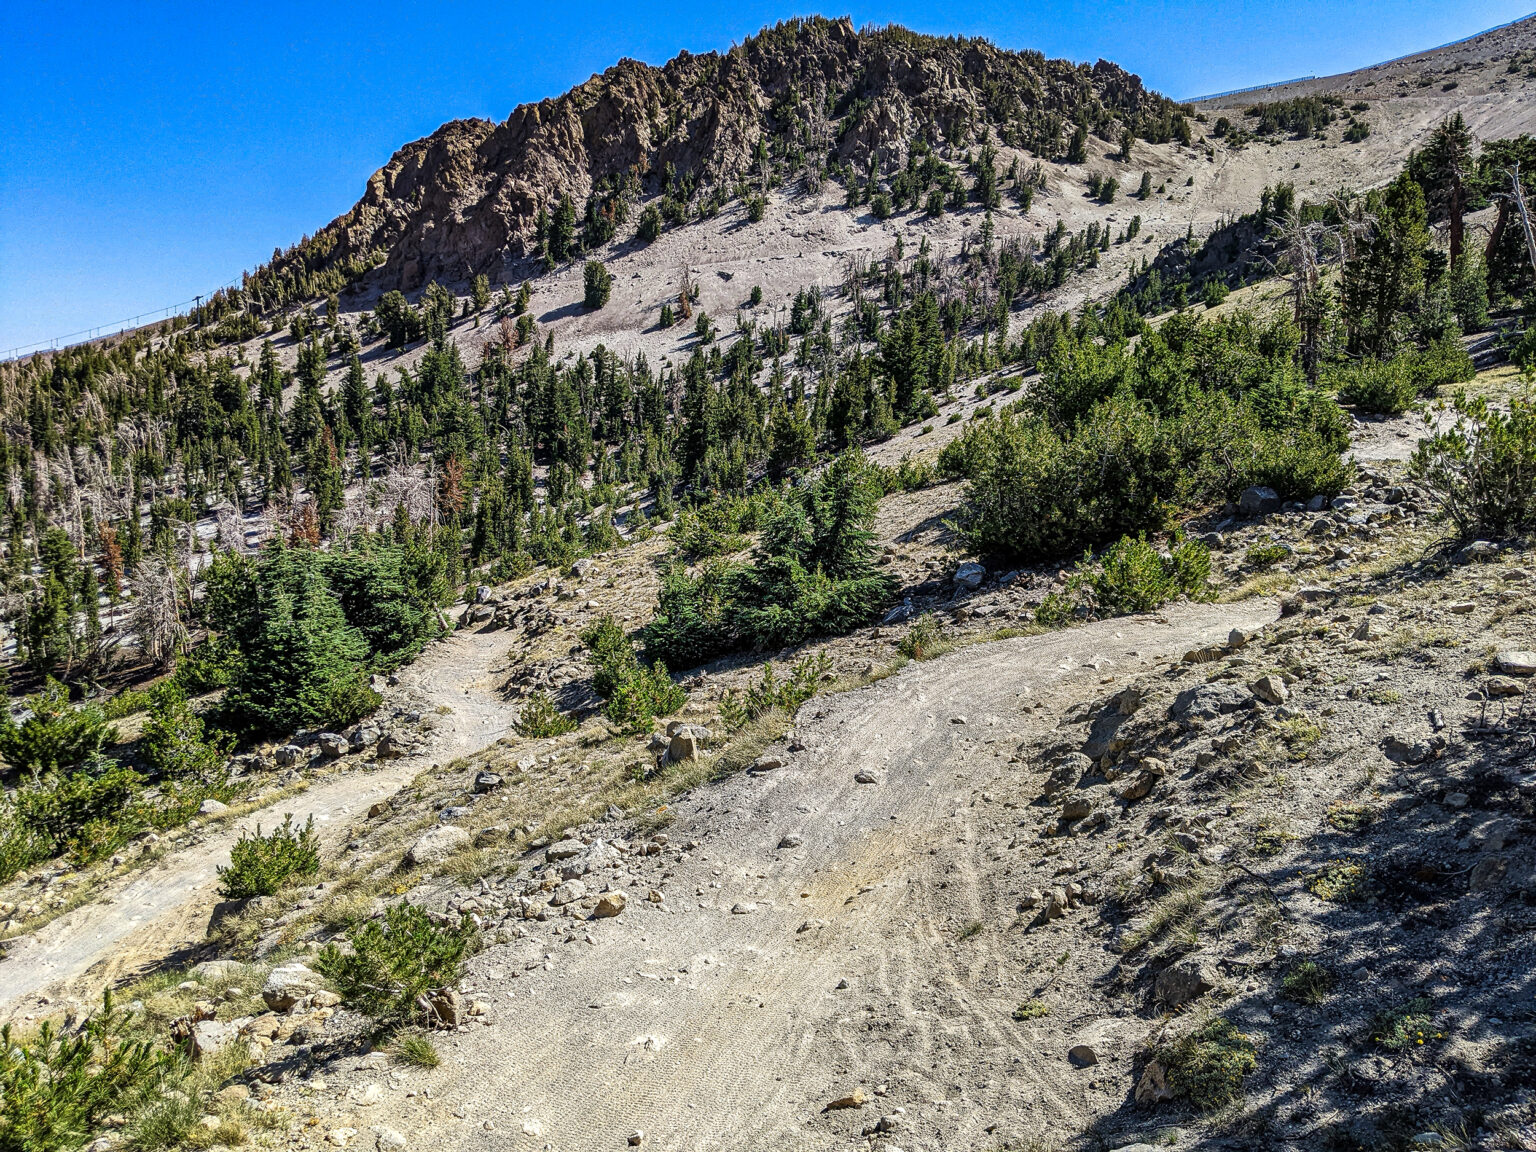 Off the Top Views at Mammoth Mountain Bike Park